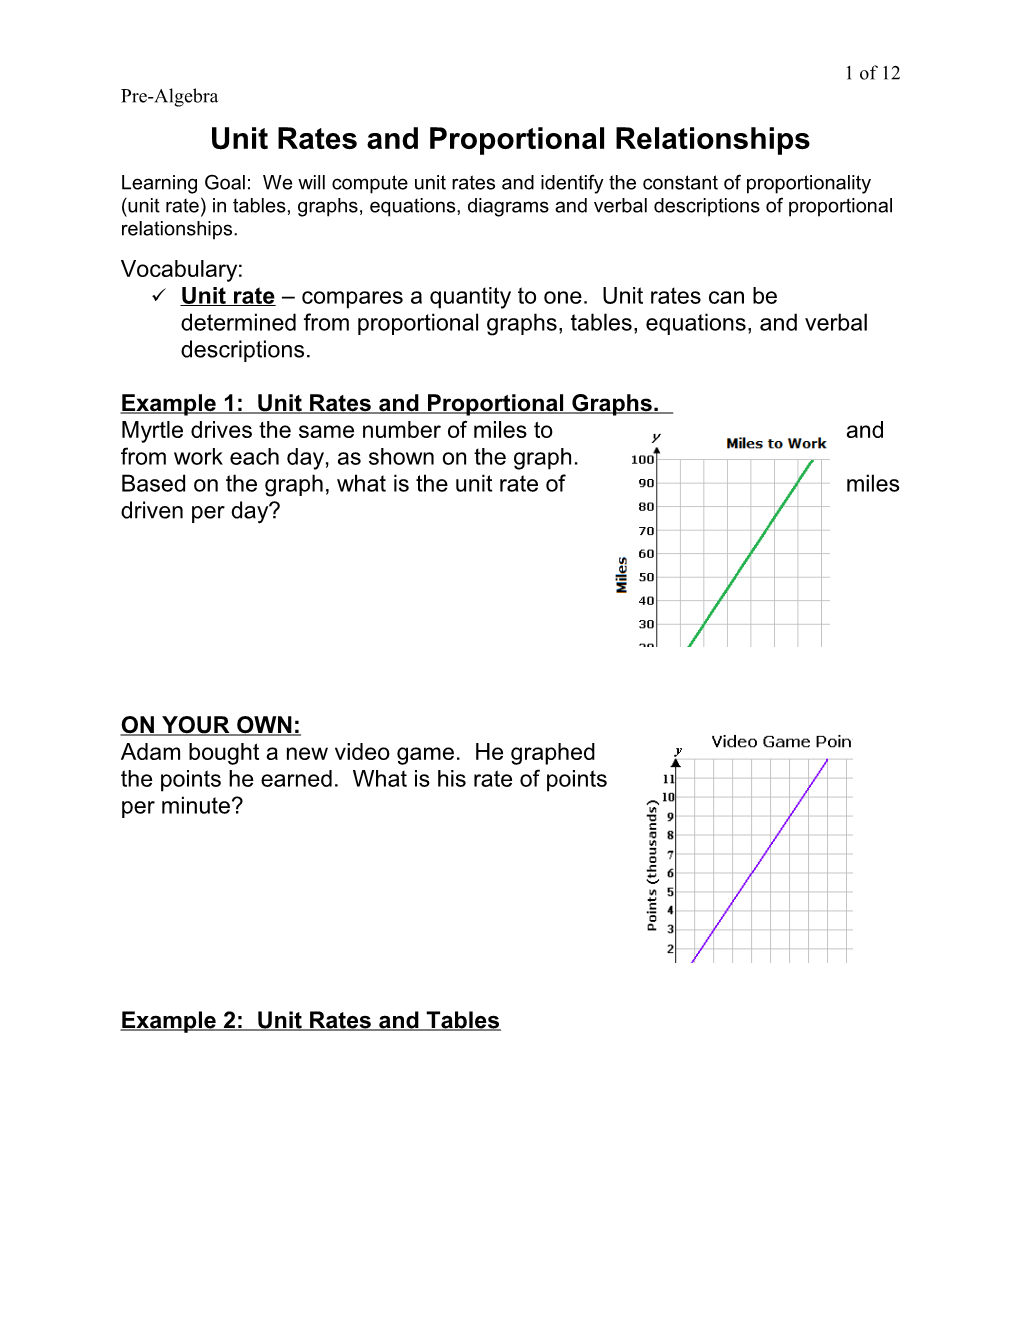 Unit Rates and Proportional Relationships